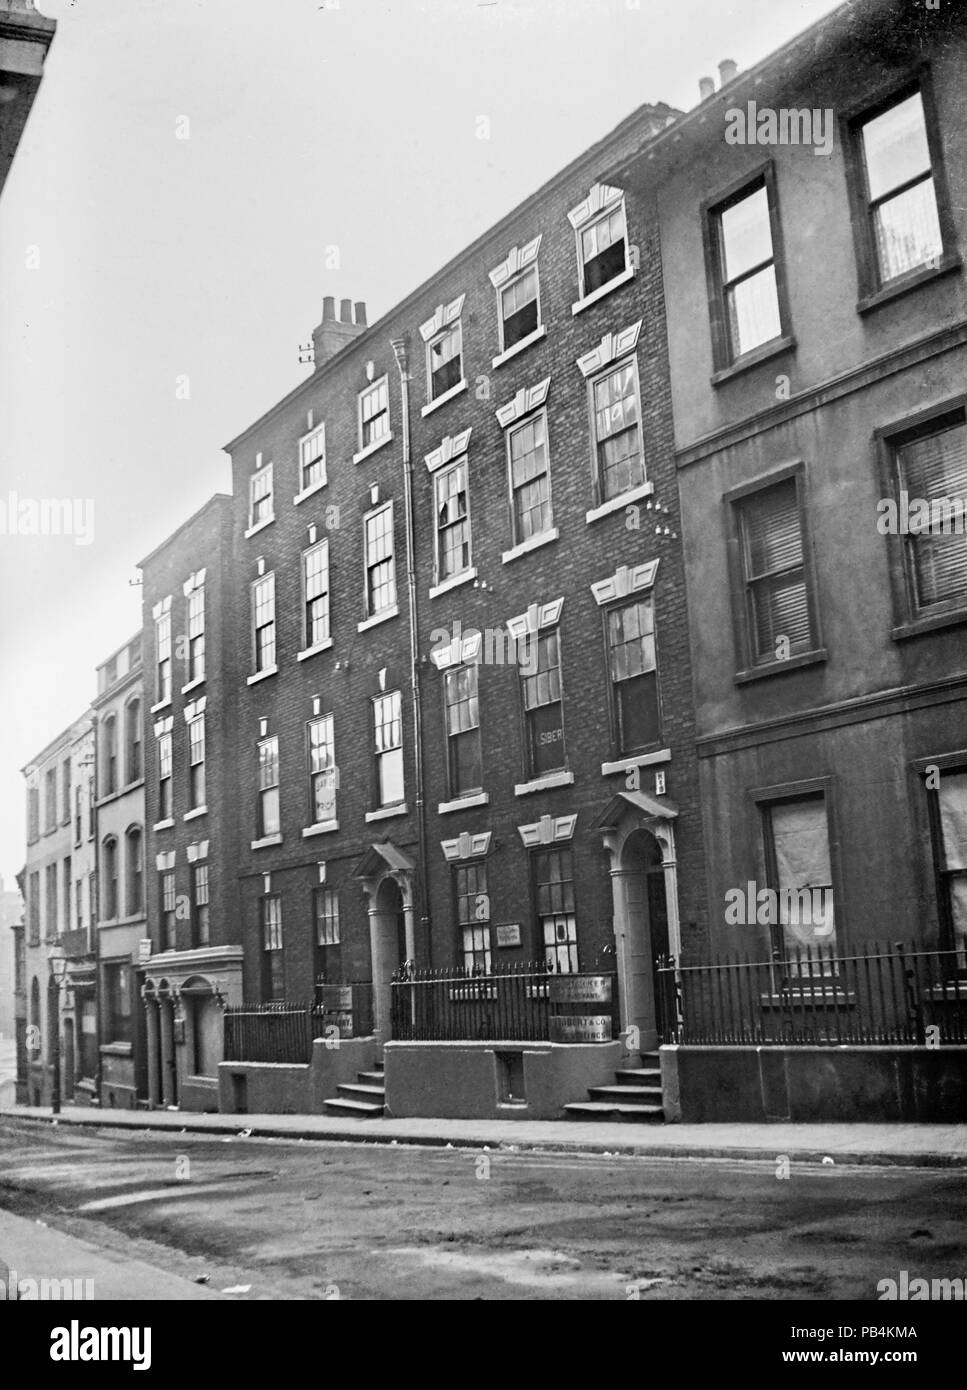 Judges lodgings were tall terraced buildings on High Pavement, Nottingham, England. Edwardian image taken in 1910 Stock Photo